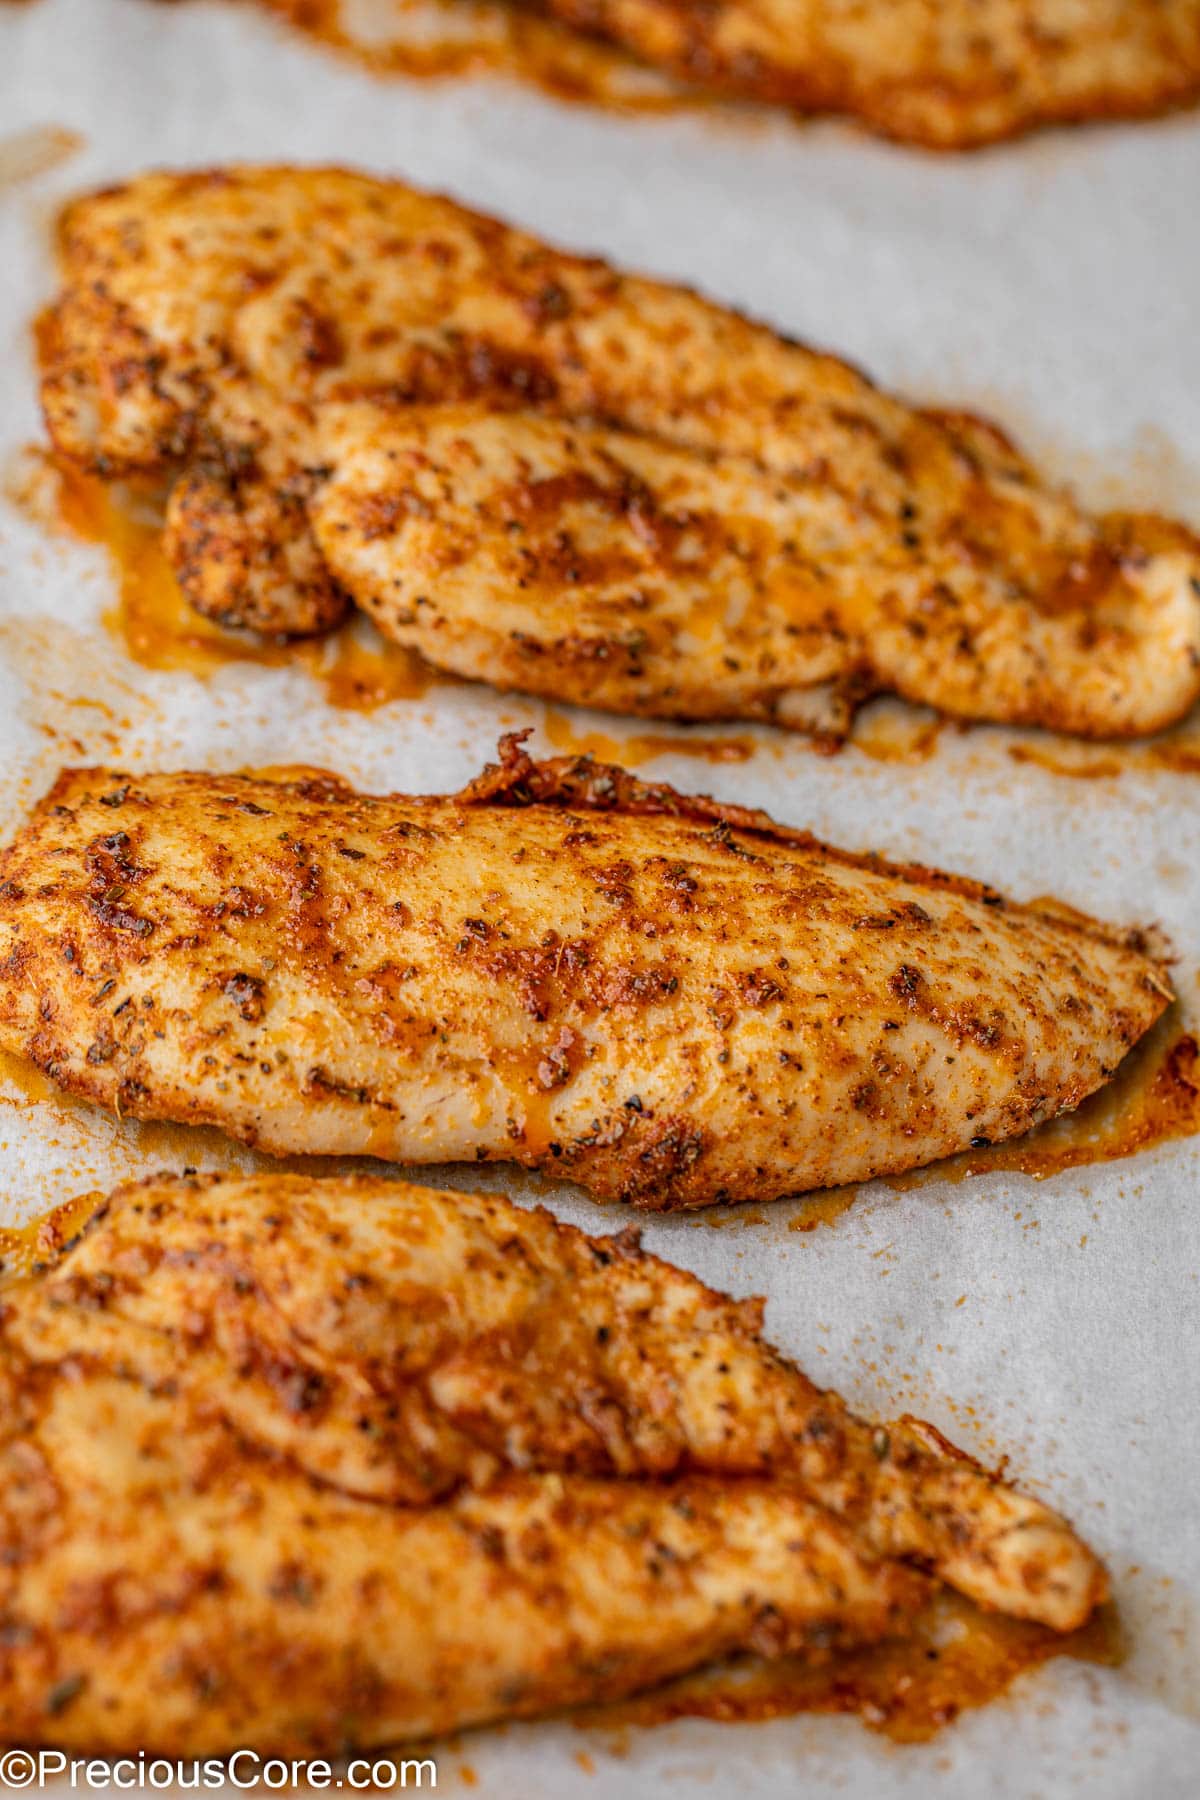 Baked thin sliced chicken breasts on parchment paper-lined baking sheet.